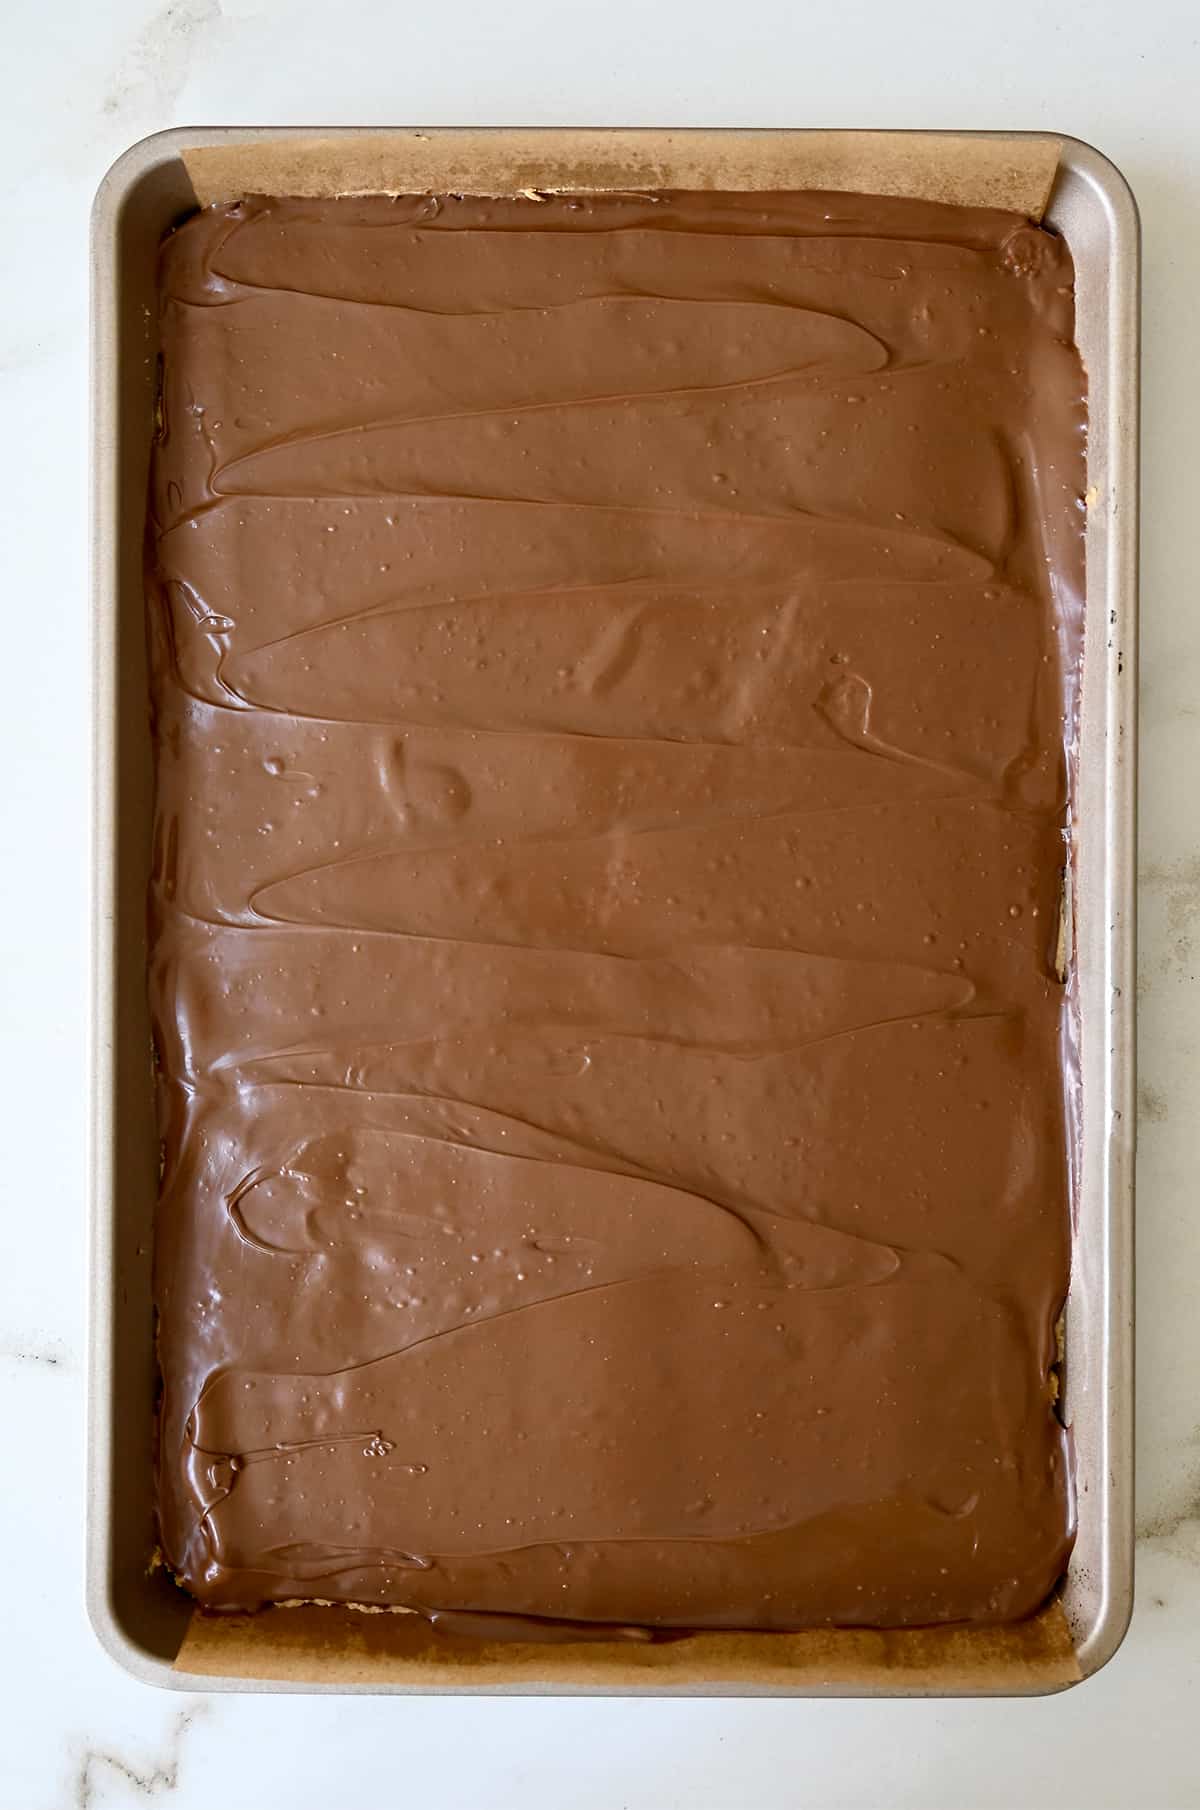 Melted chocolate atop peanut butter bars on a baking sheet.